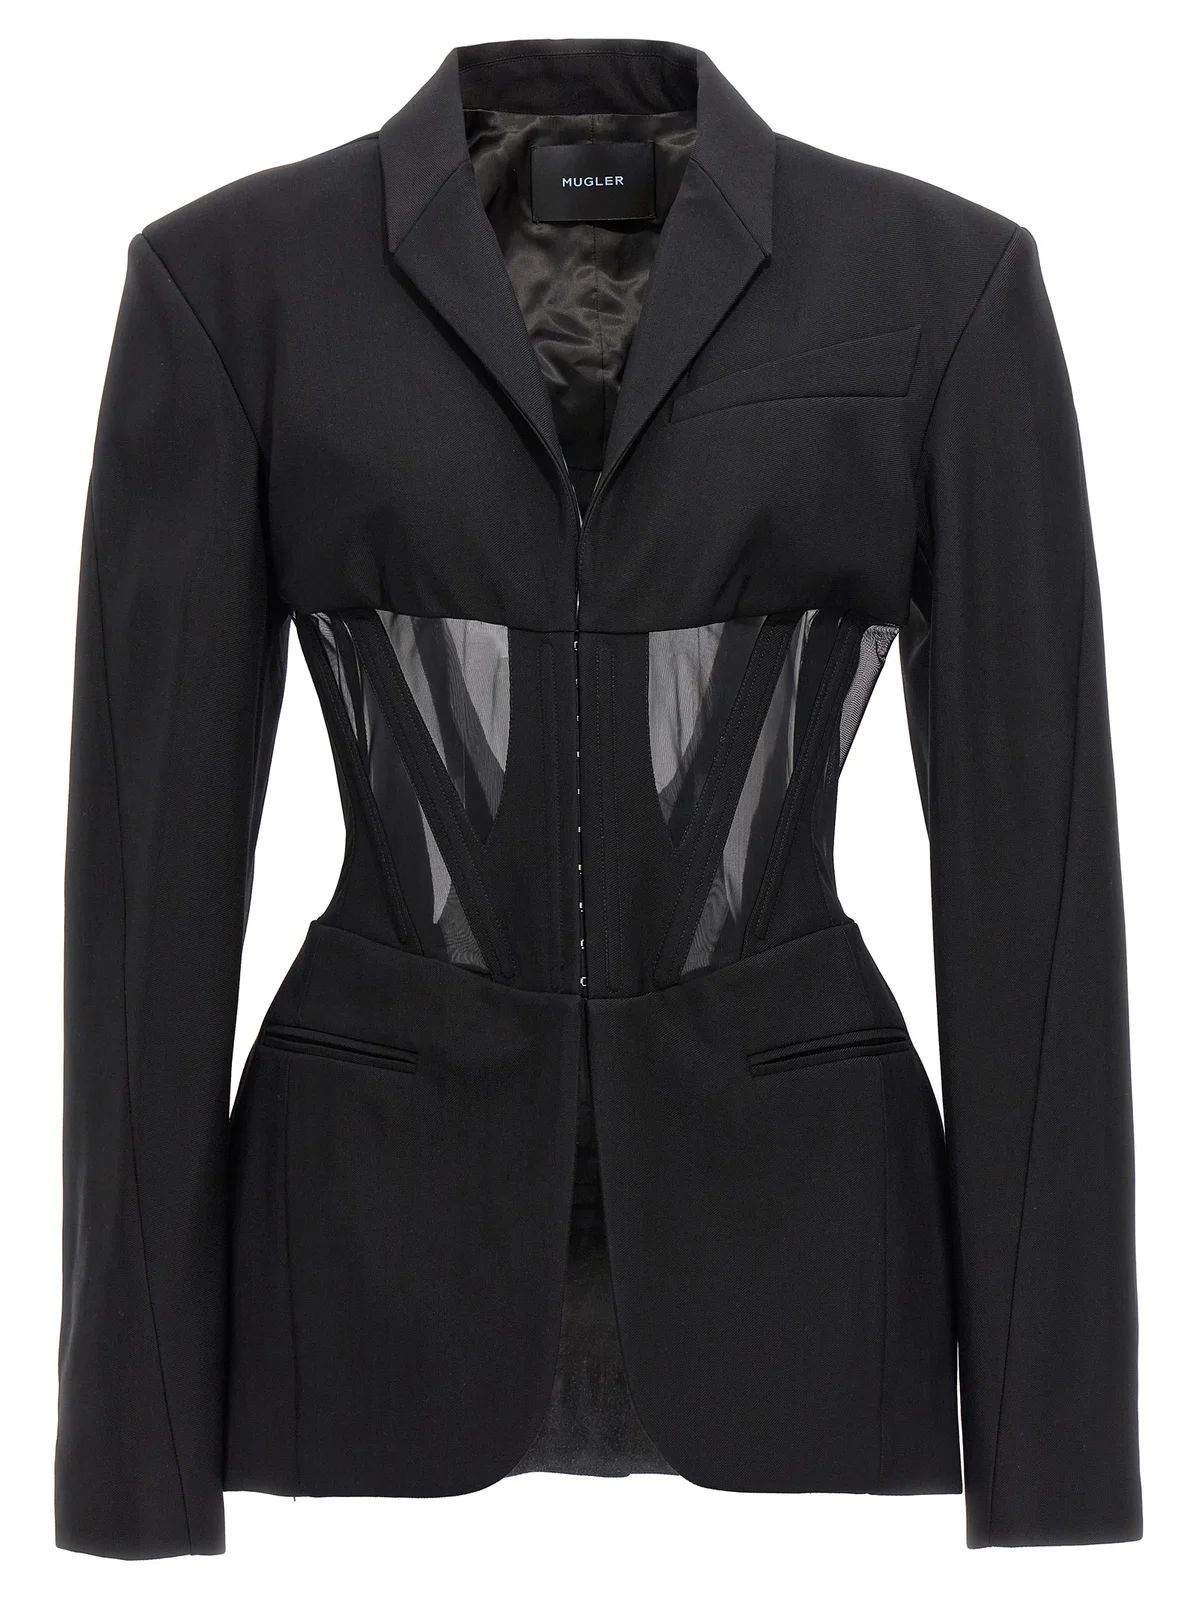 Mugler Iconic Single-Breasted Tailored Corseted Blazer | Cettire Global